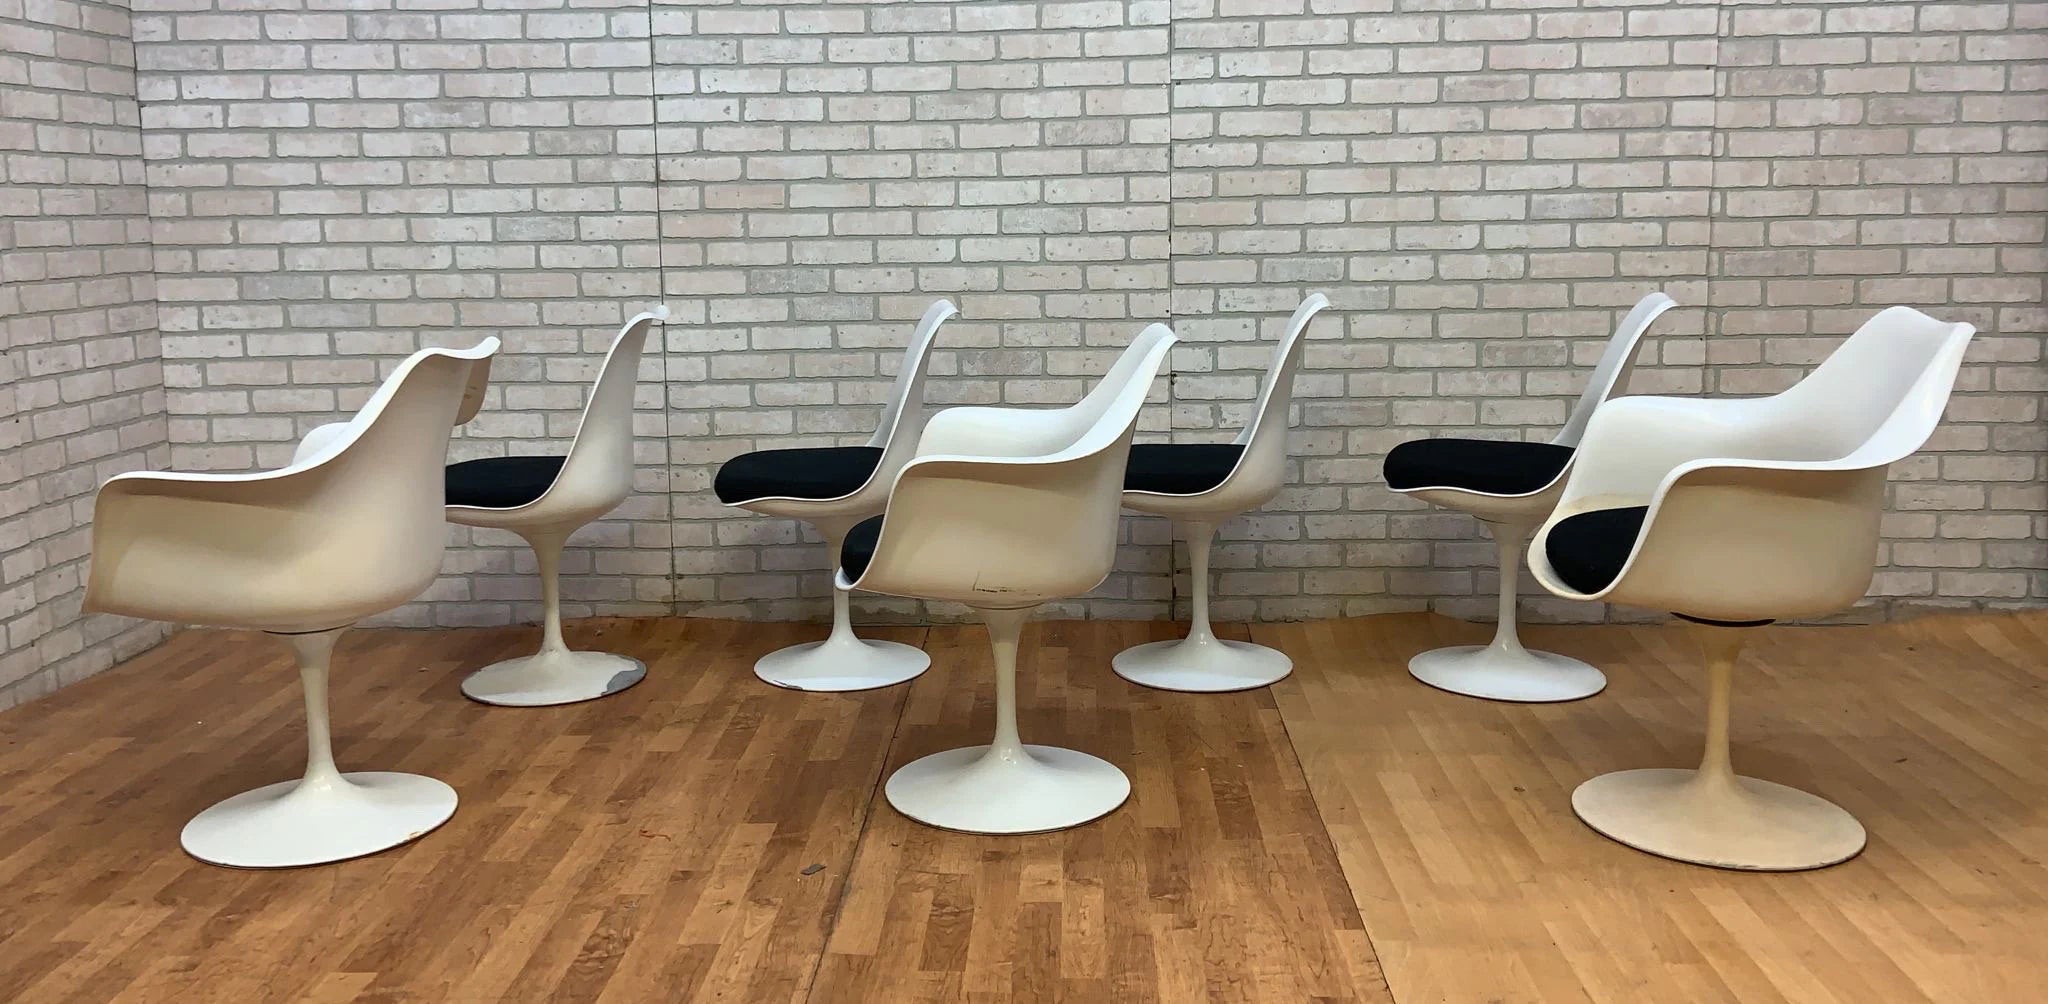 Vintage Tulip Swivel Chairs by Eero Saarinen for Knoll International - 3 Armchairs and 3 Slipper Chairs - Set of 6